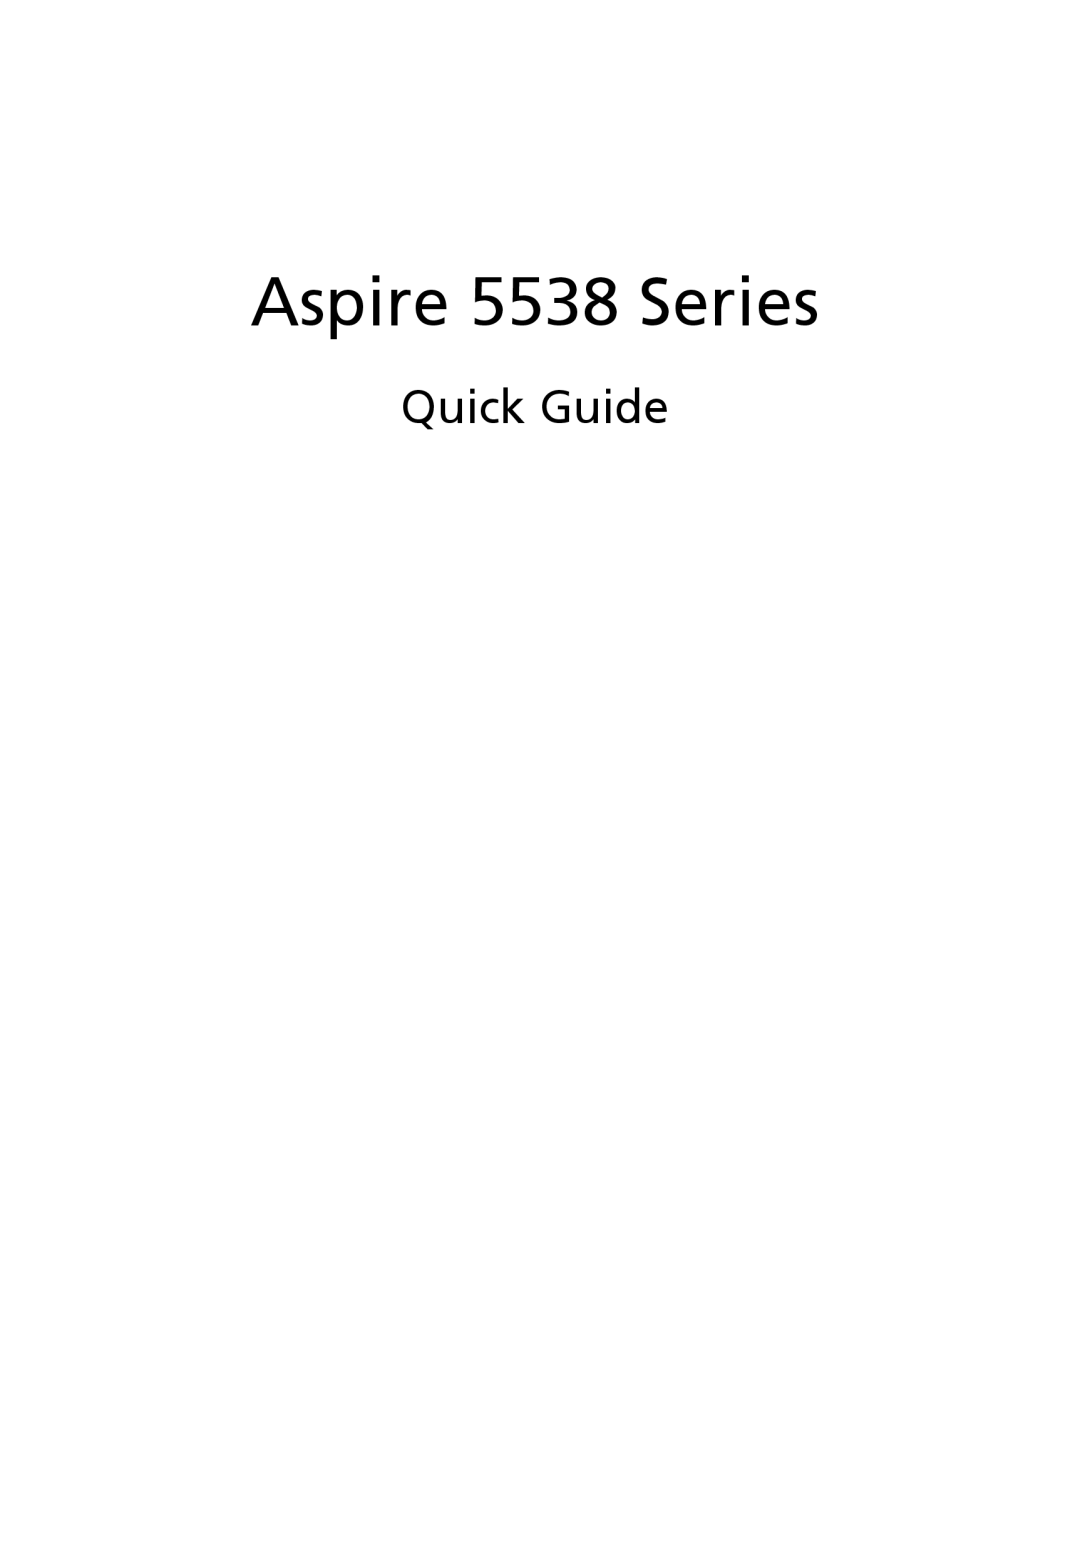 Acer manual Quick Guide, Aspire 5538 Series 